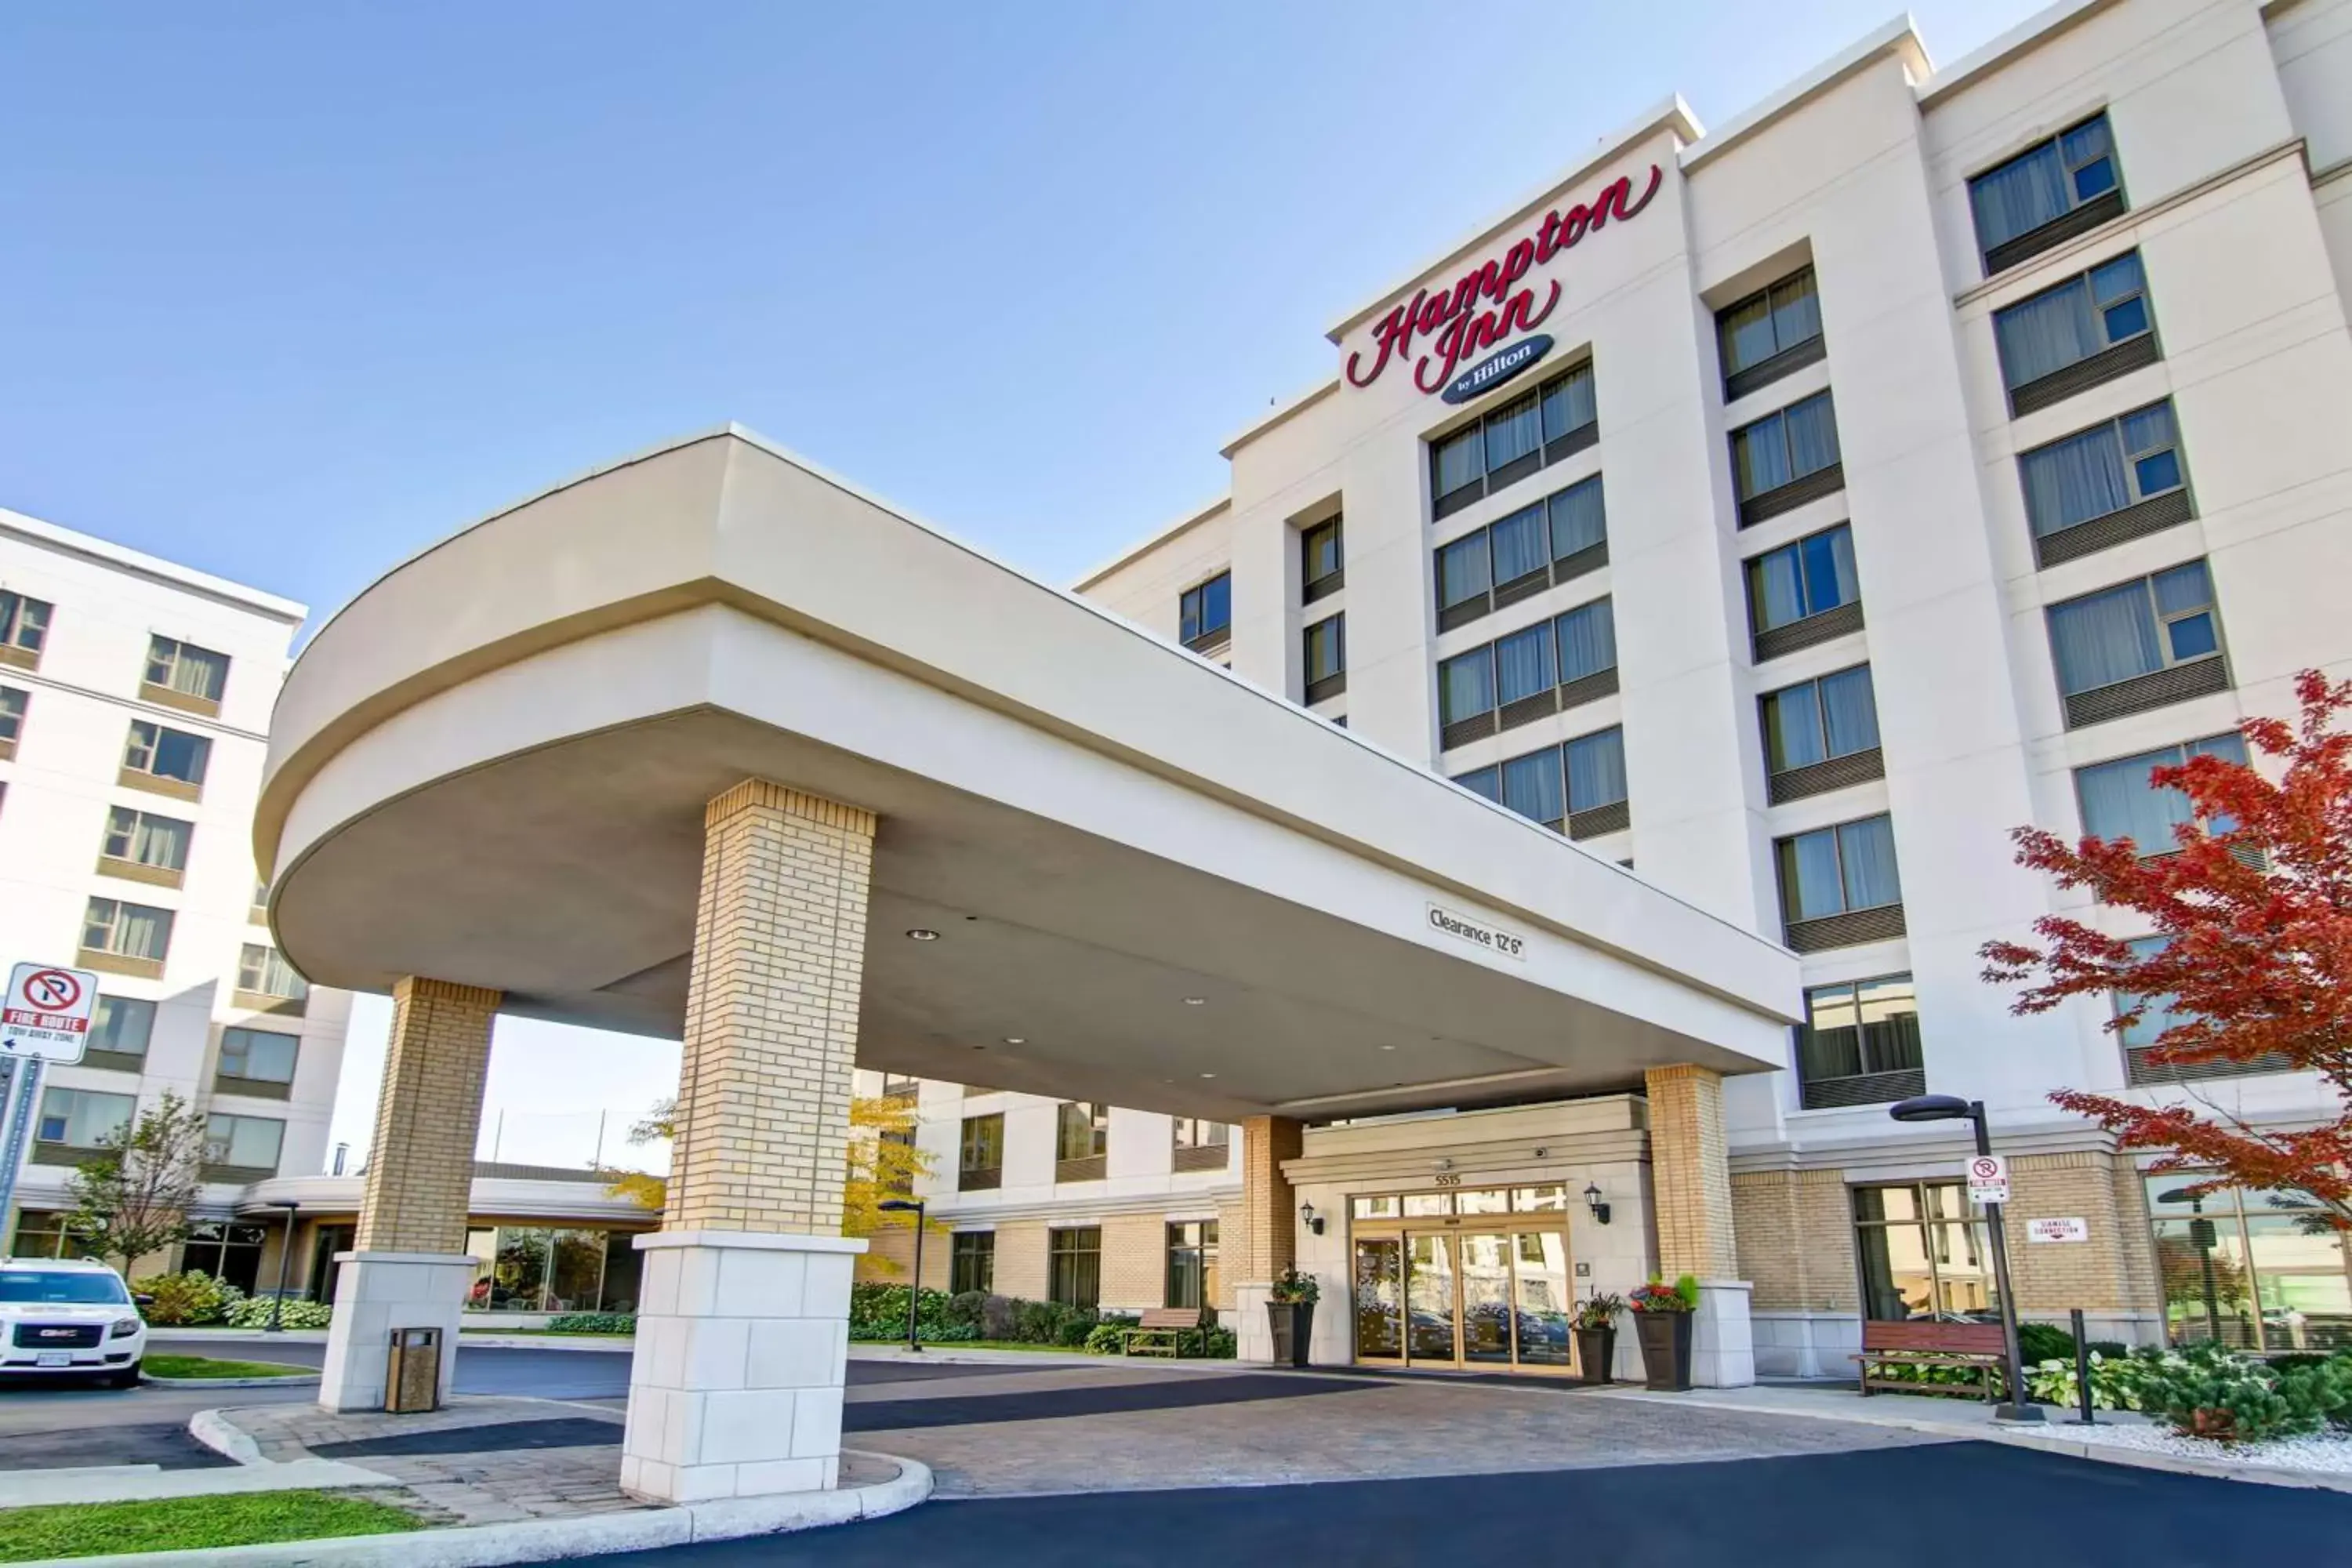 Property Building in Hampton Inn by Hilton Toronto Airport Corporate Centre